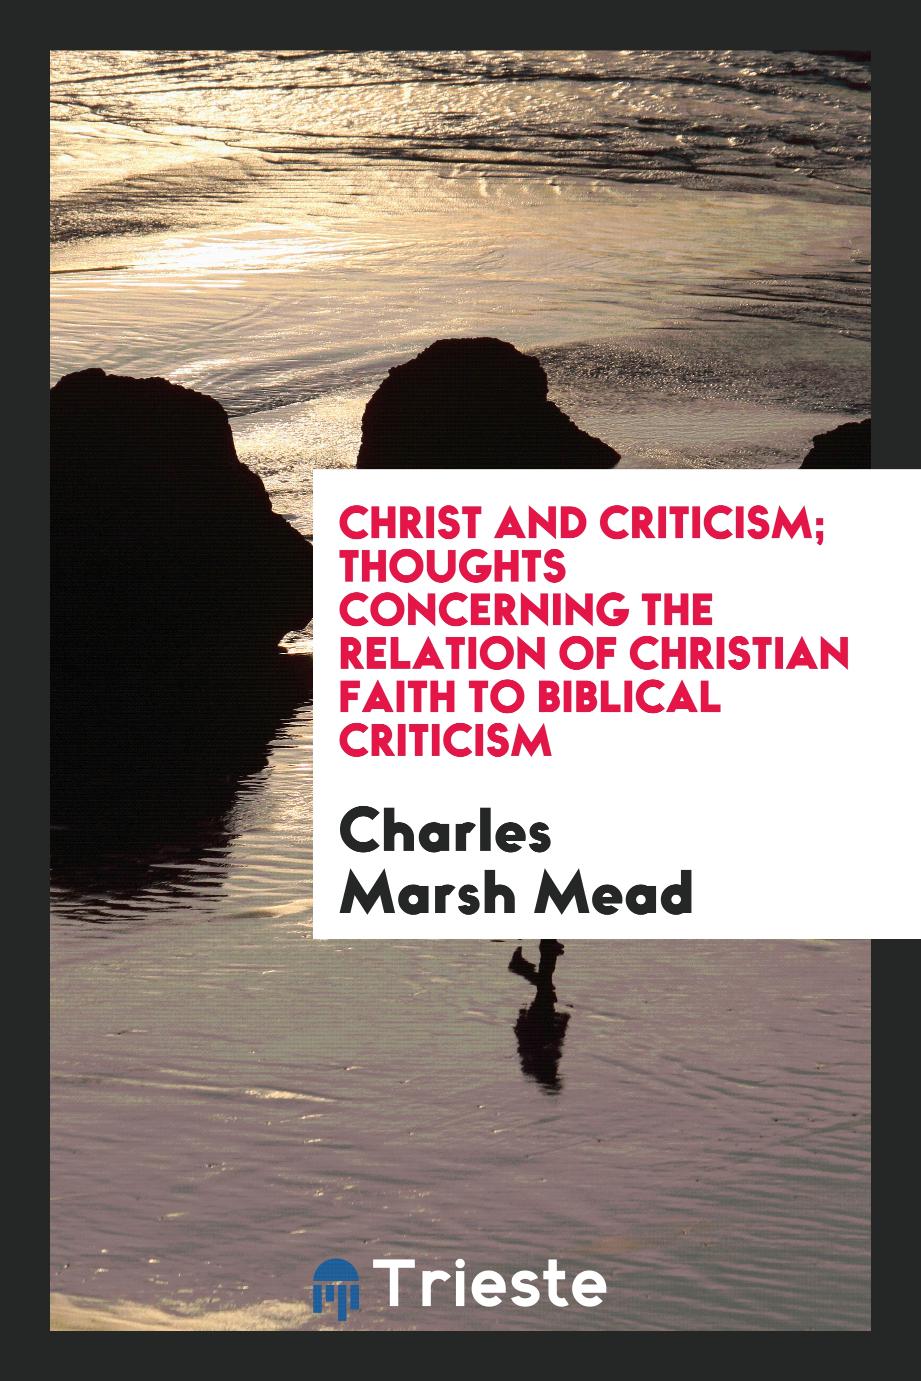 Christ and criticism; thoughts concerning the relation of Christian faith to Biblical criticism